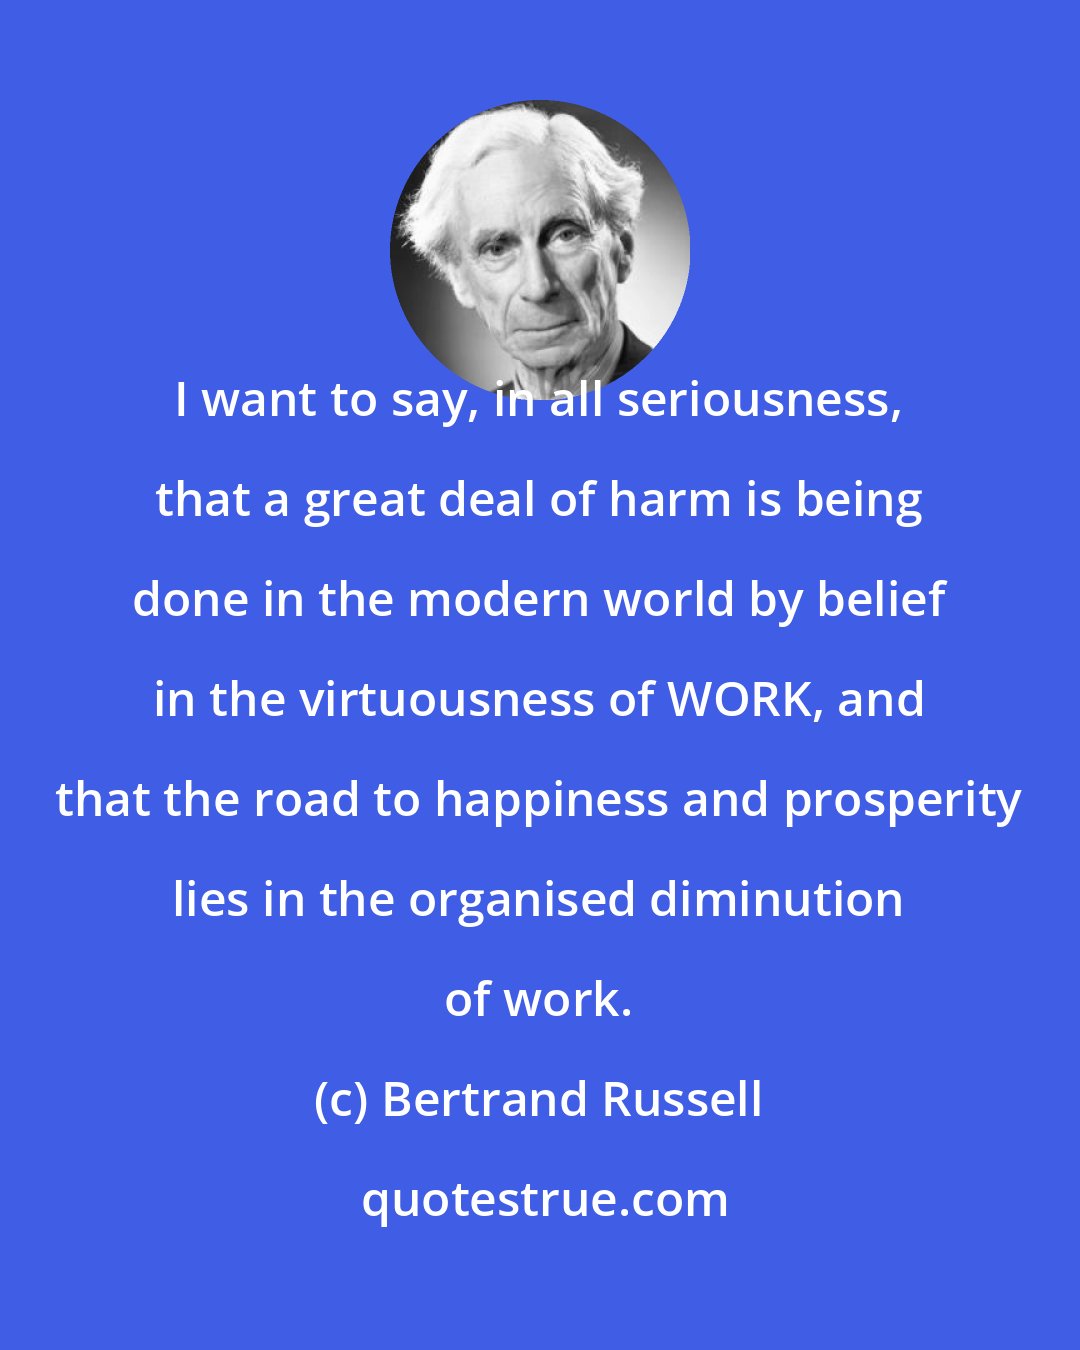 Bertrand Russell: I want to say, in all seriousness, that a great deal of harm is being done in the modern world by belief in the virtuousness of WORK, and that the road to happiness and prosperity lies in the organised diminution of work.